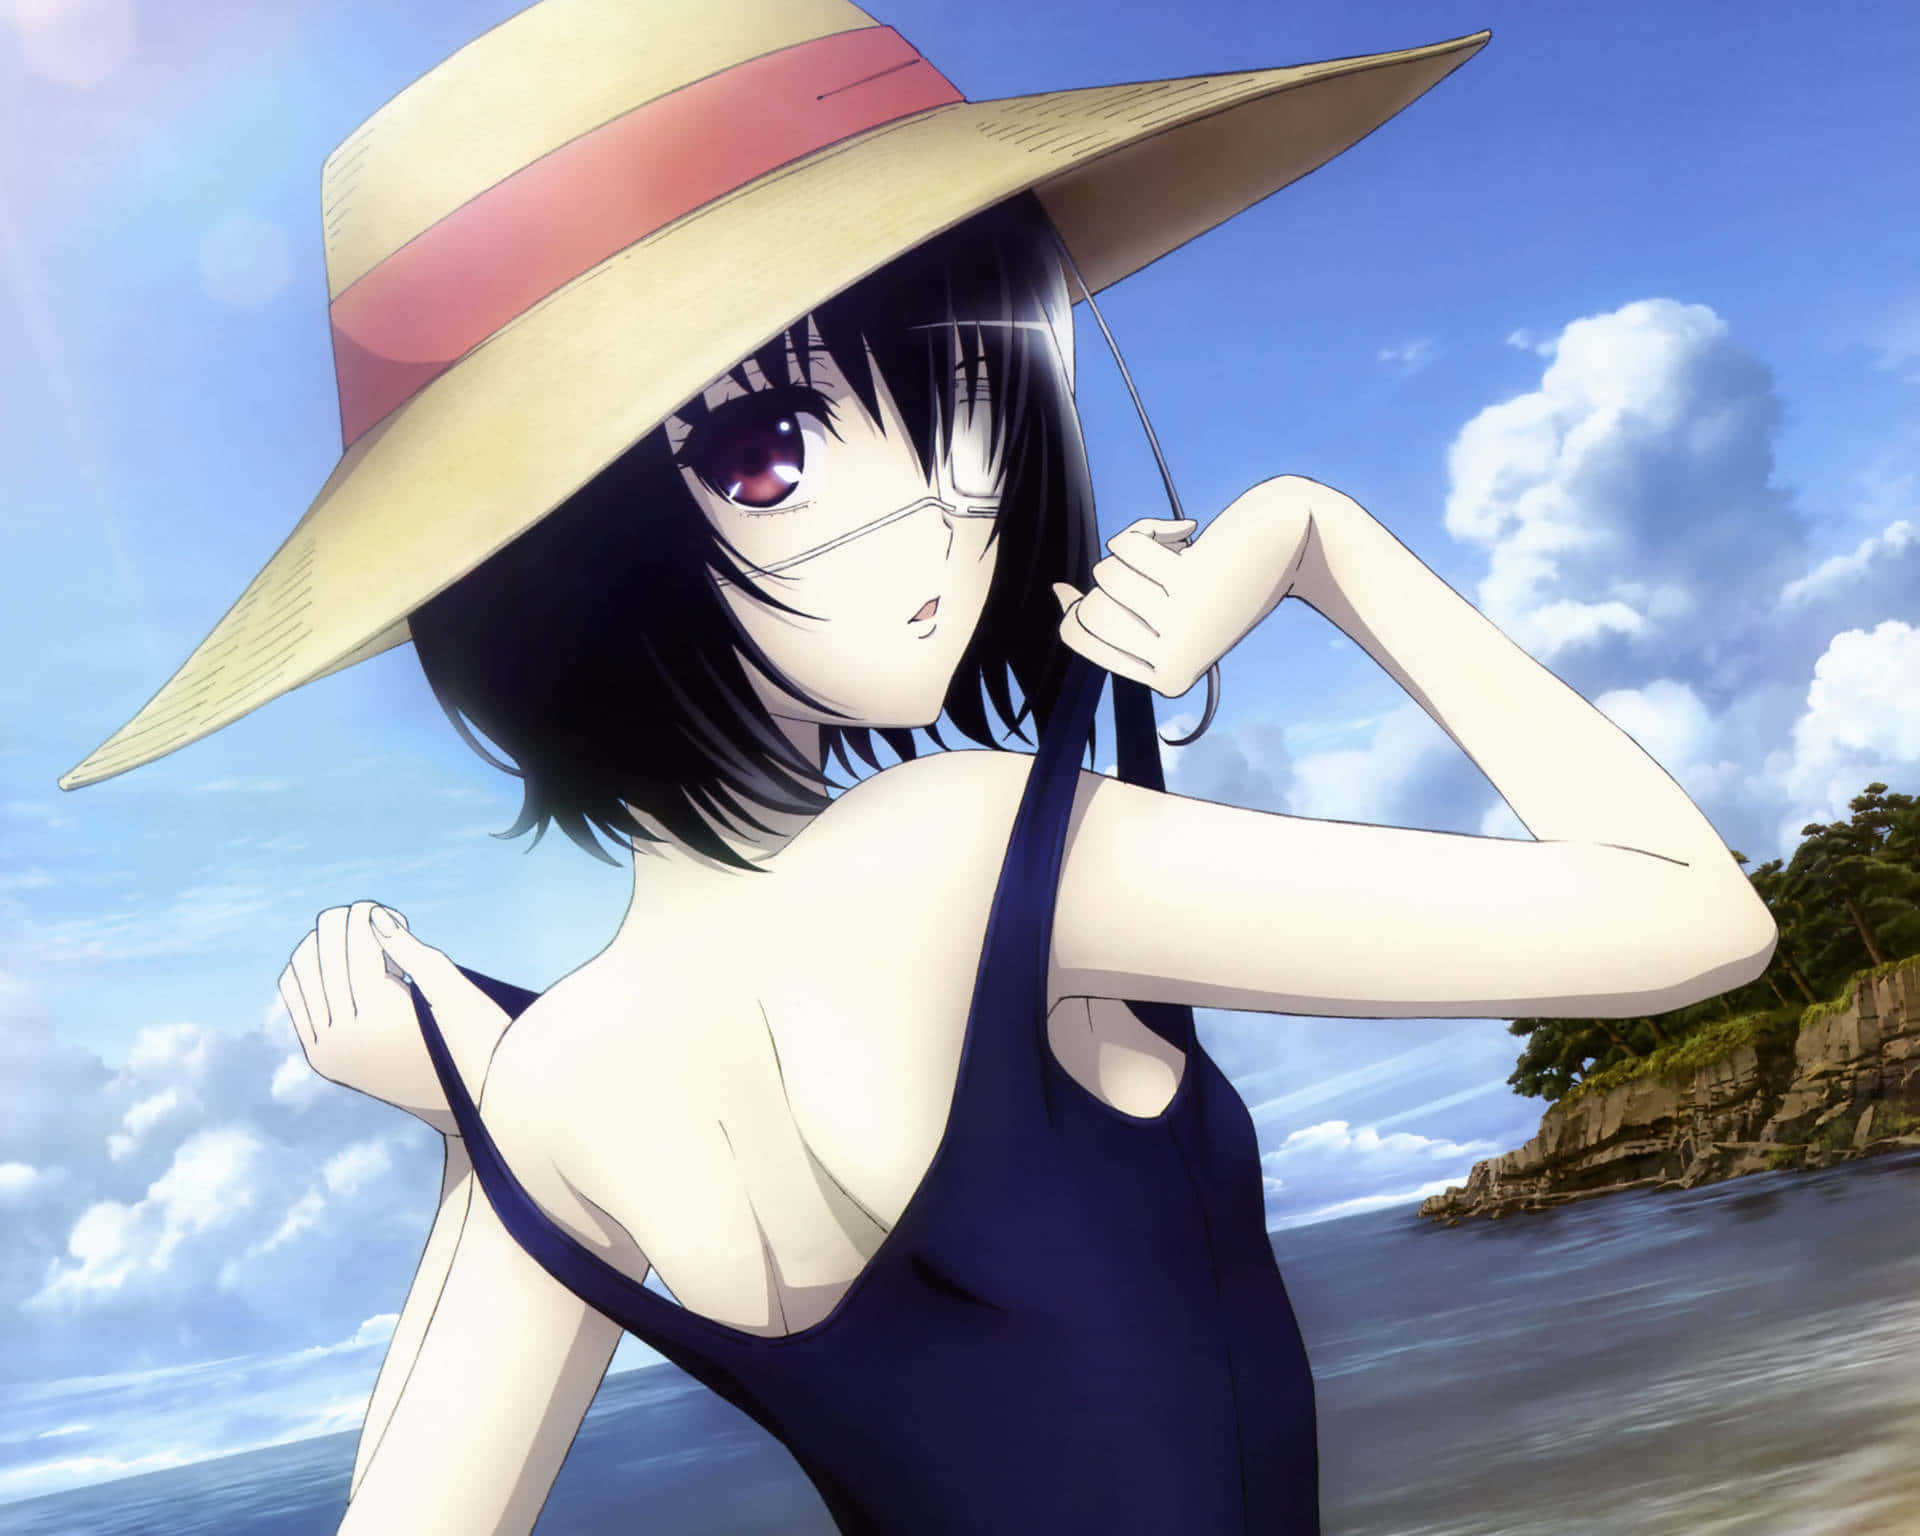 A Girl In A Hat And Dress On The Beach